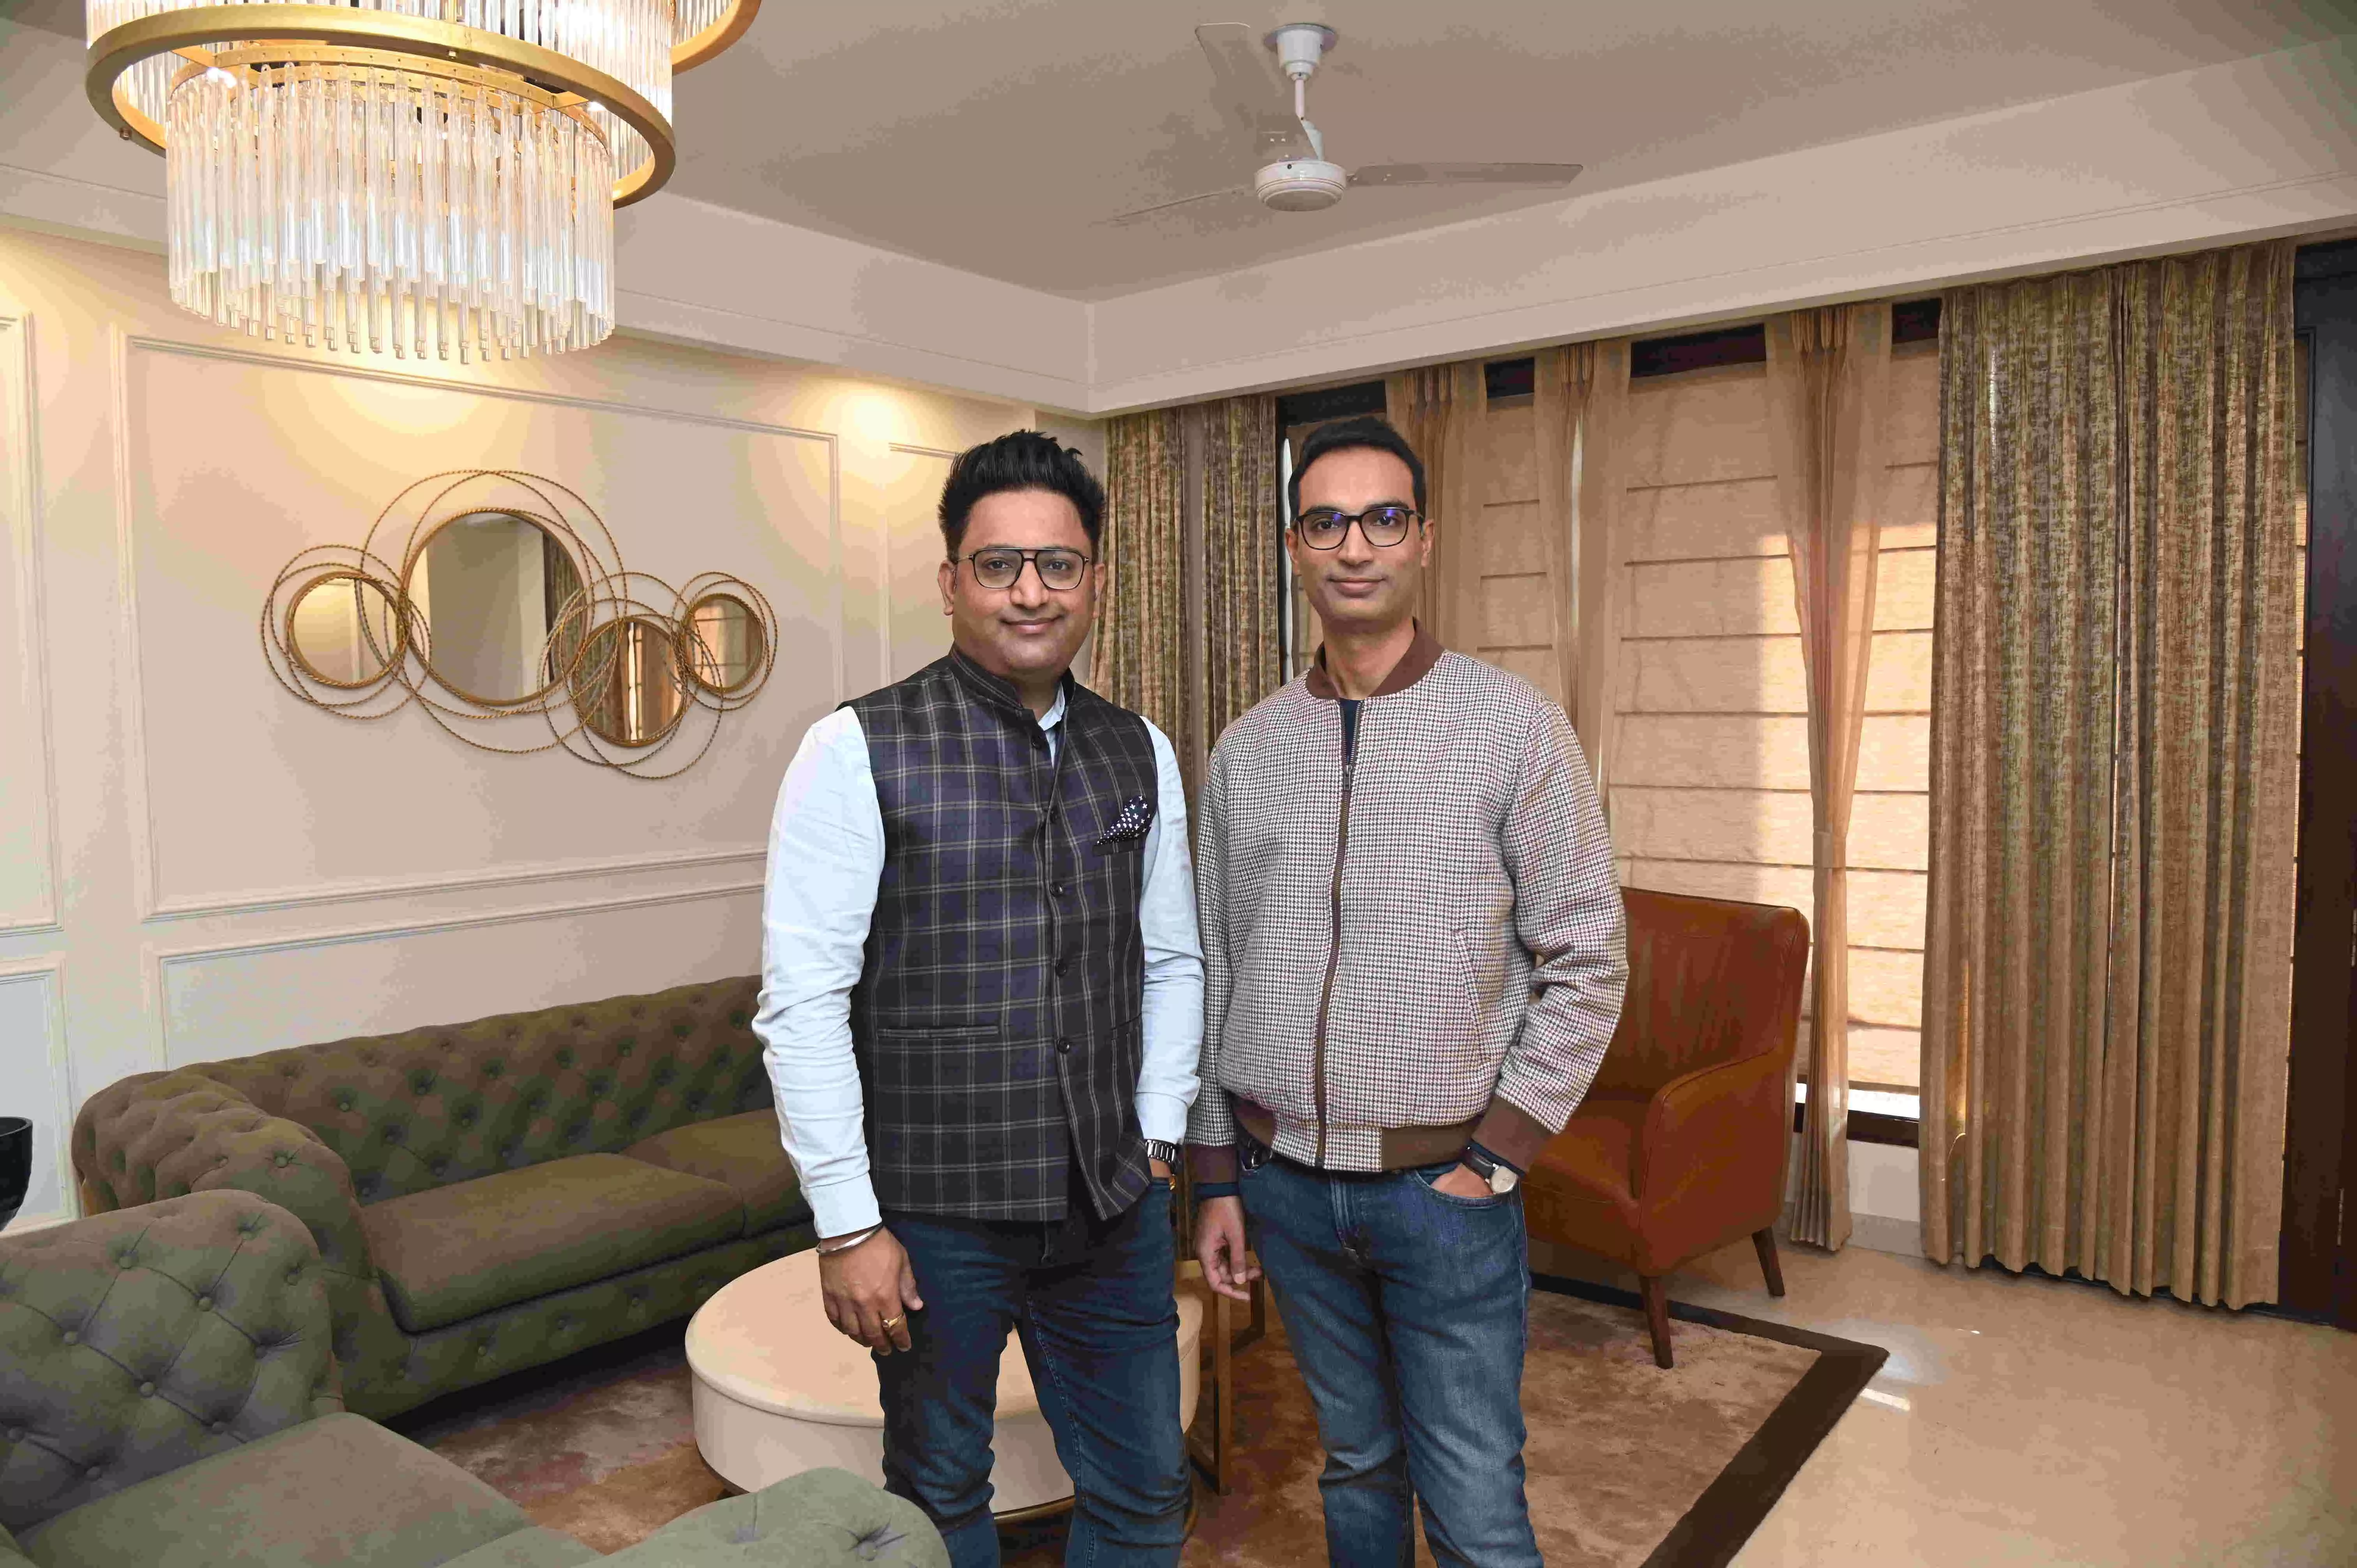 HouseEazy, an online marketplace for pre-owned homes, raises $1mn seed funding led by Antler